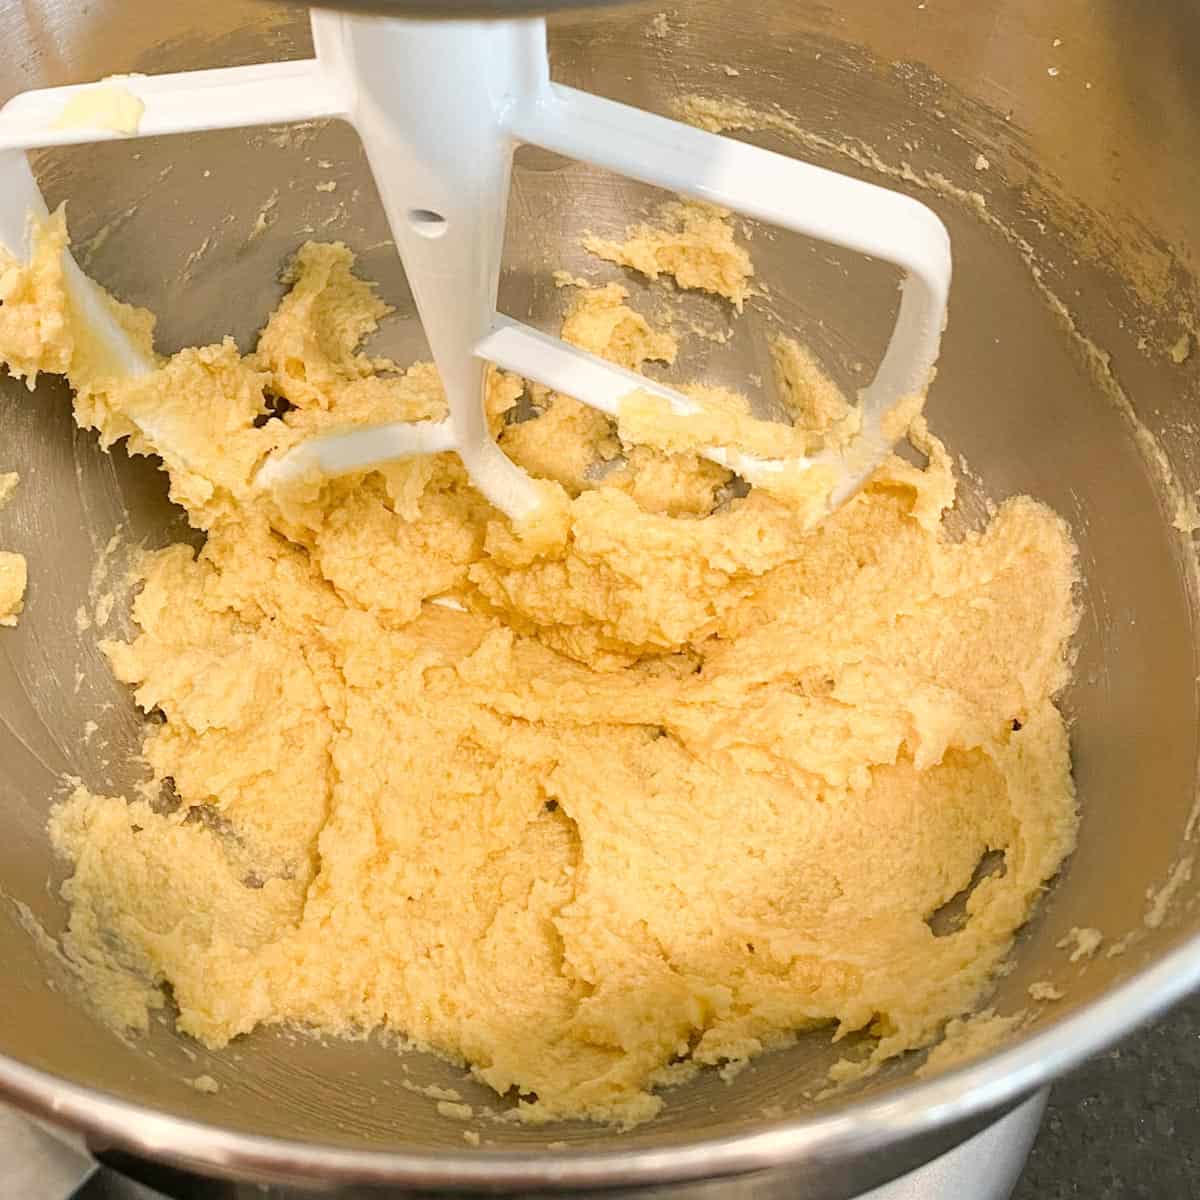 Butter, sugar and egg creamed together in a bowl.